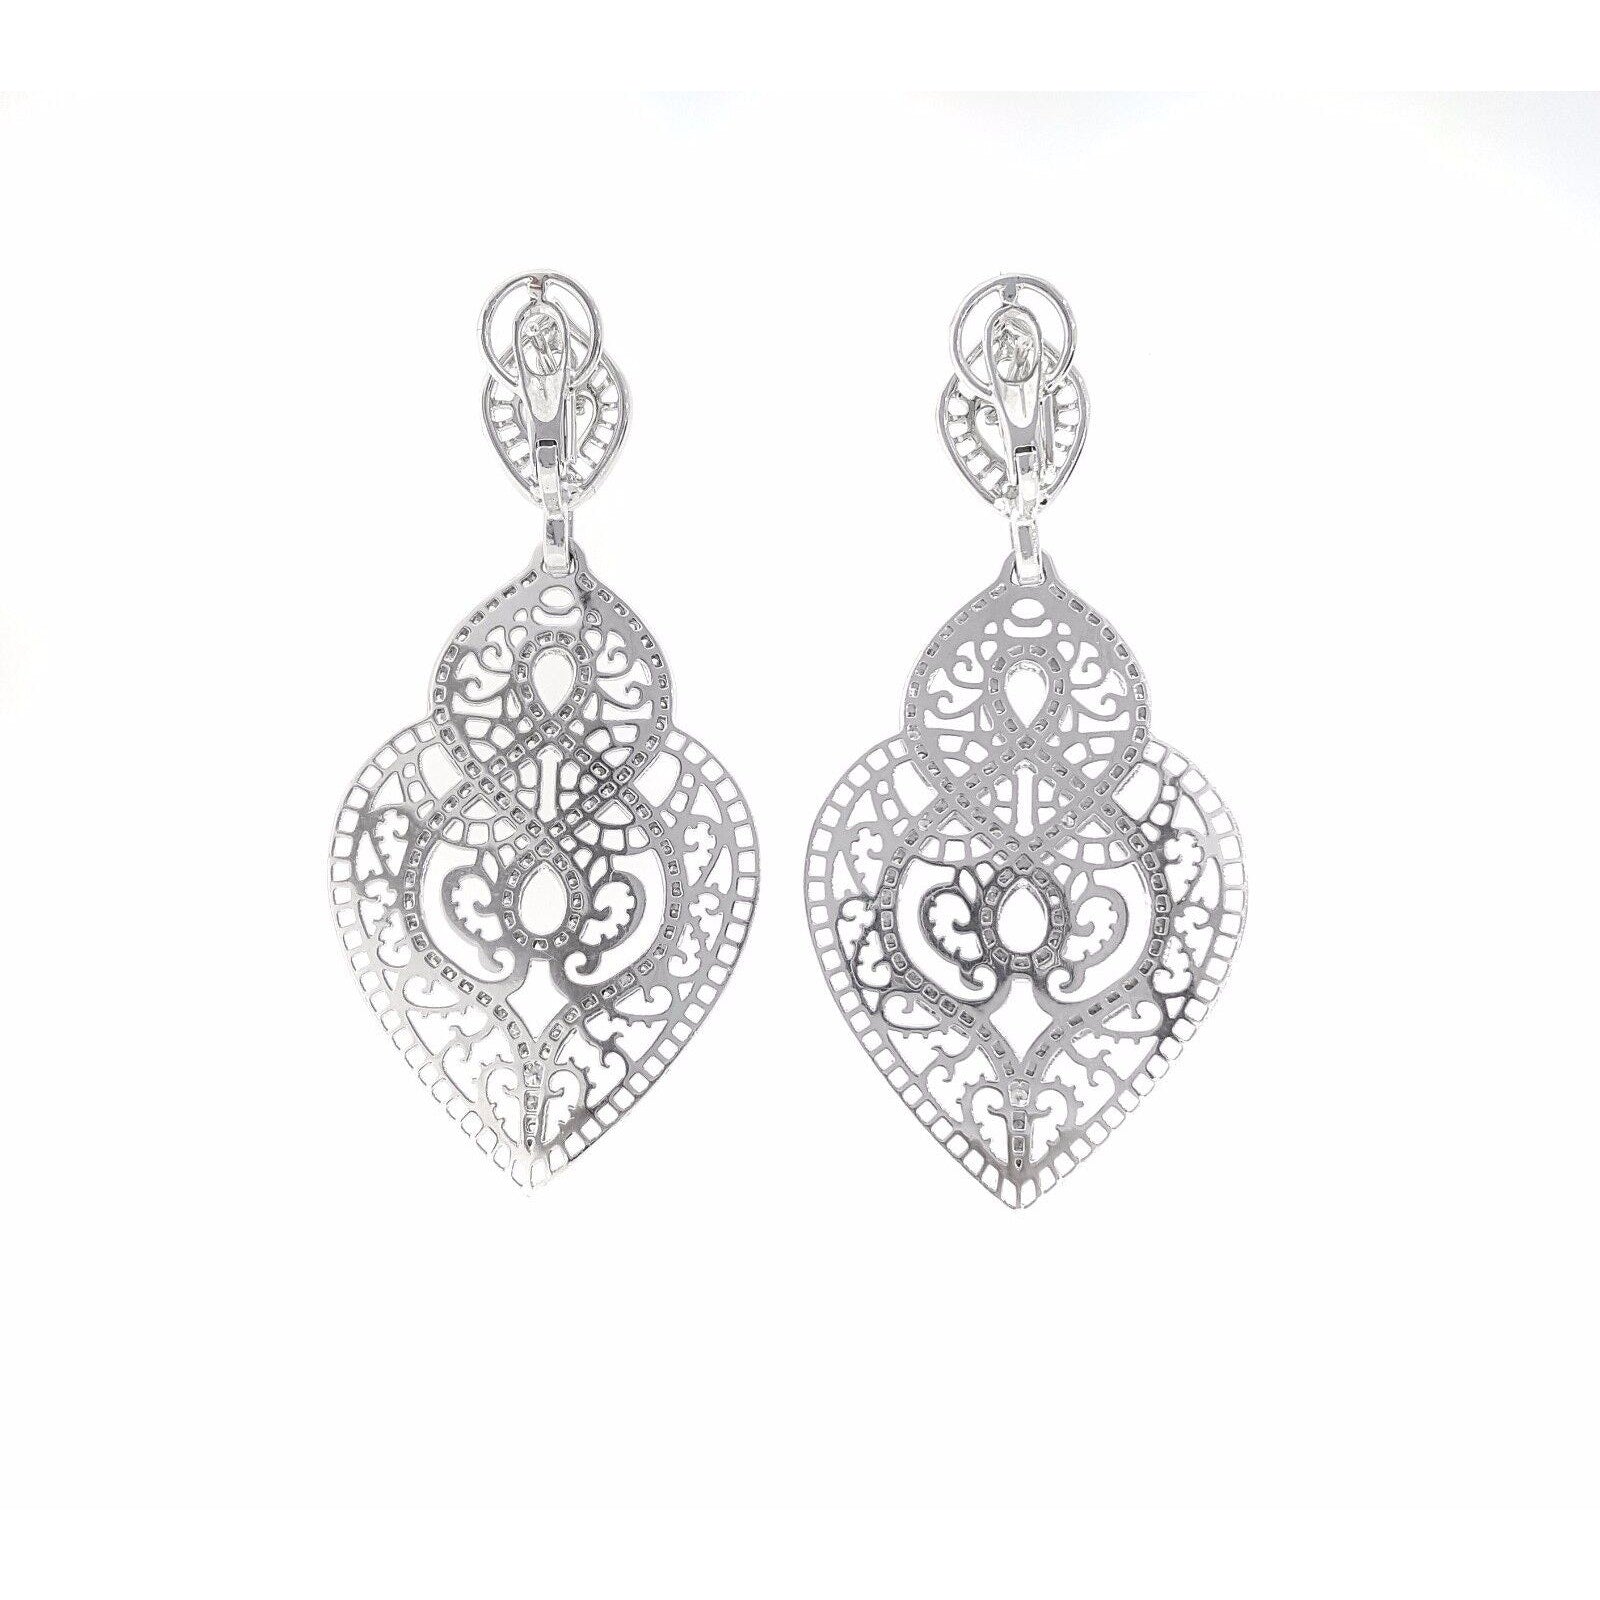 2.27 carat Diamond Lace Heart Cut-out Earrings by Crivelli 18k White Gold